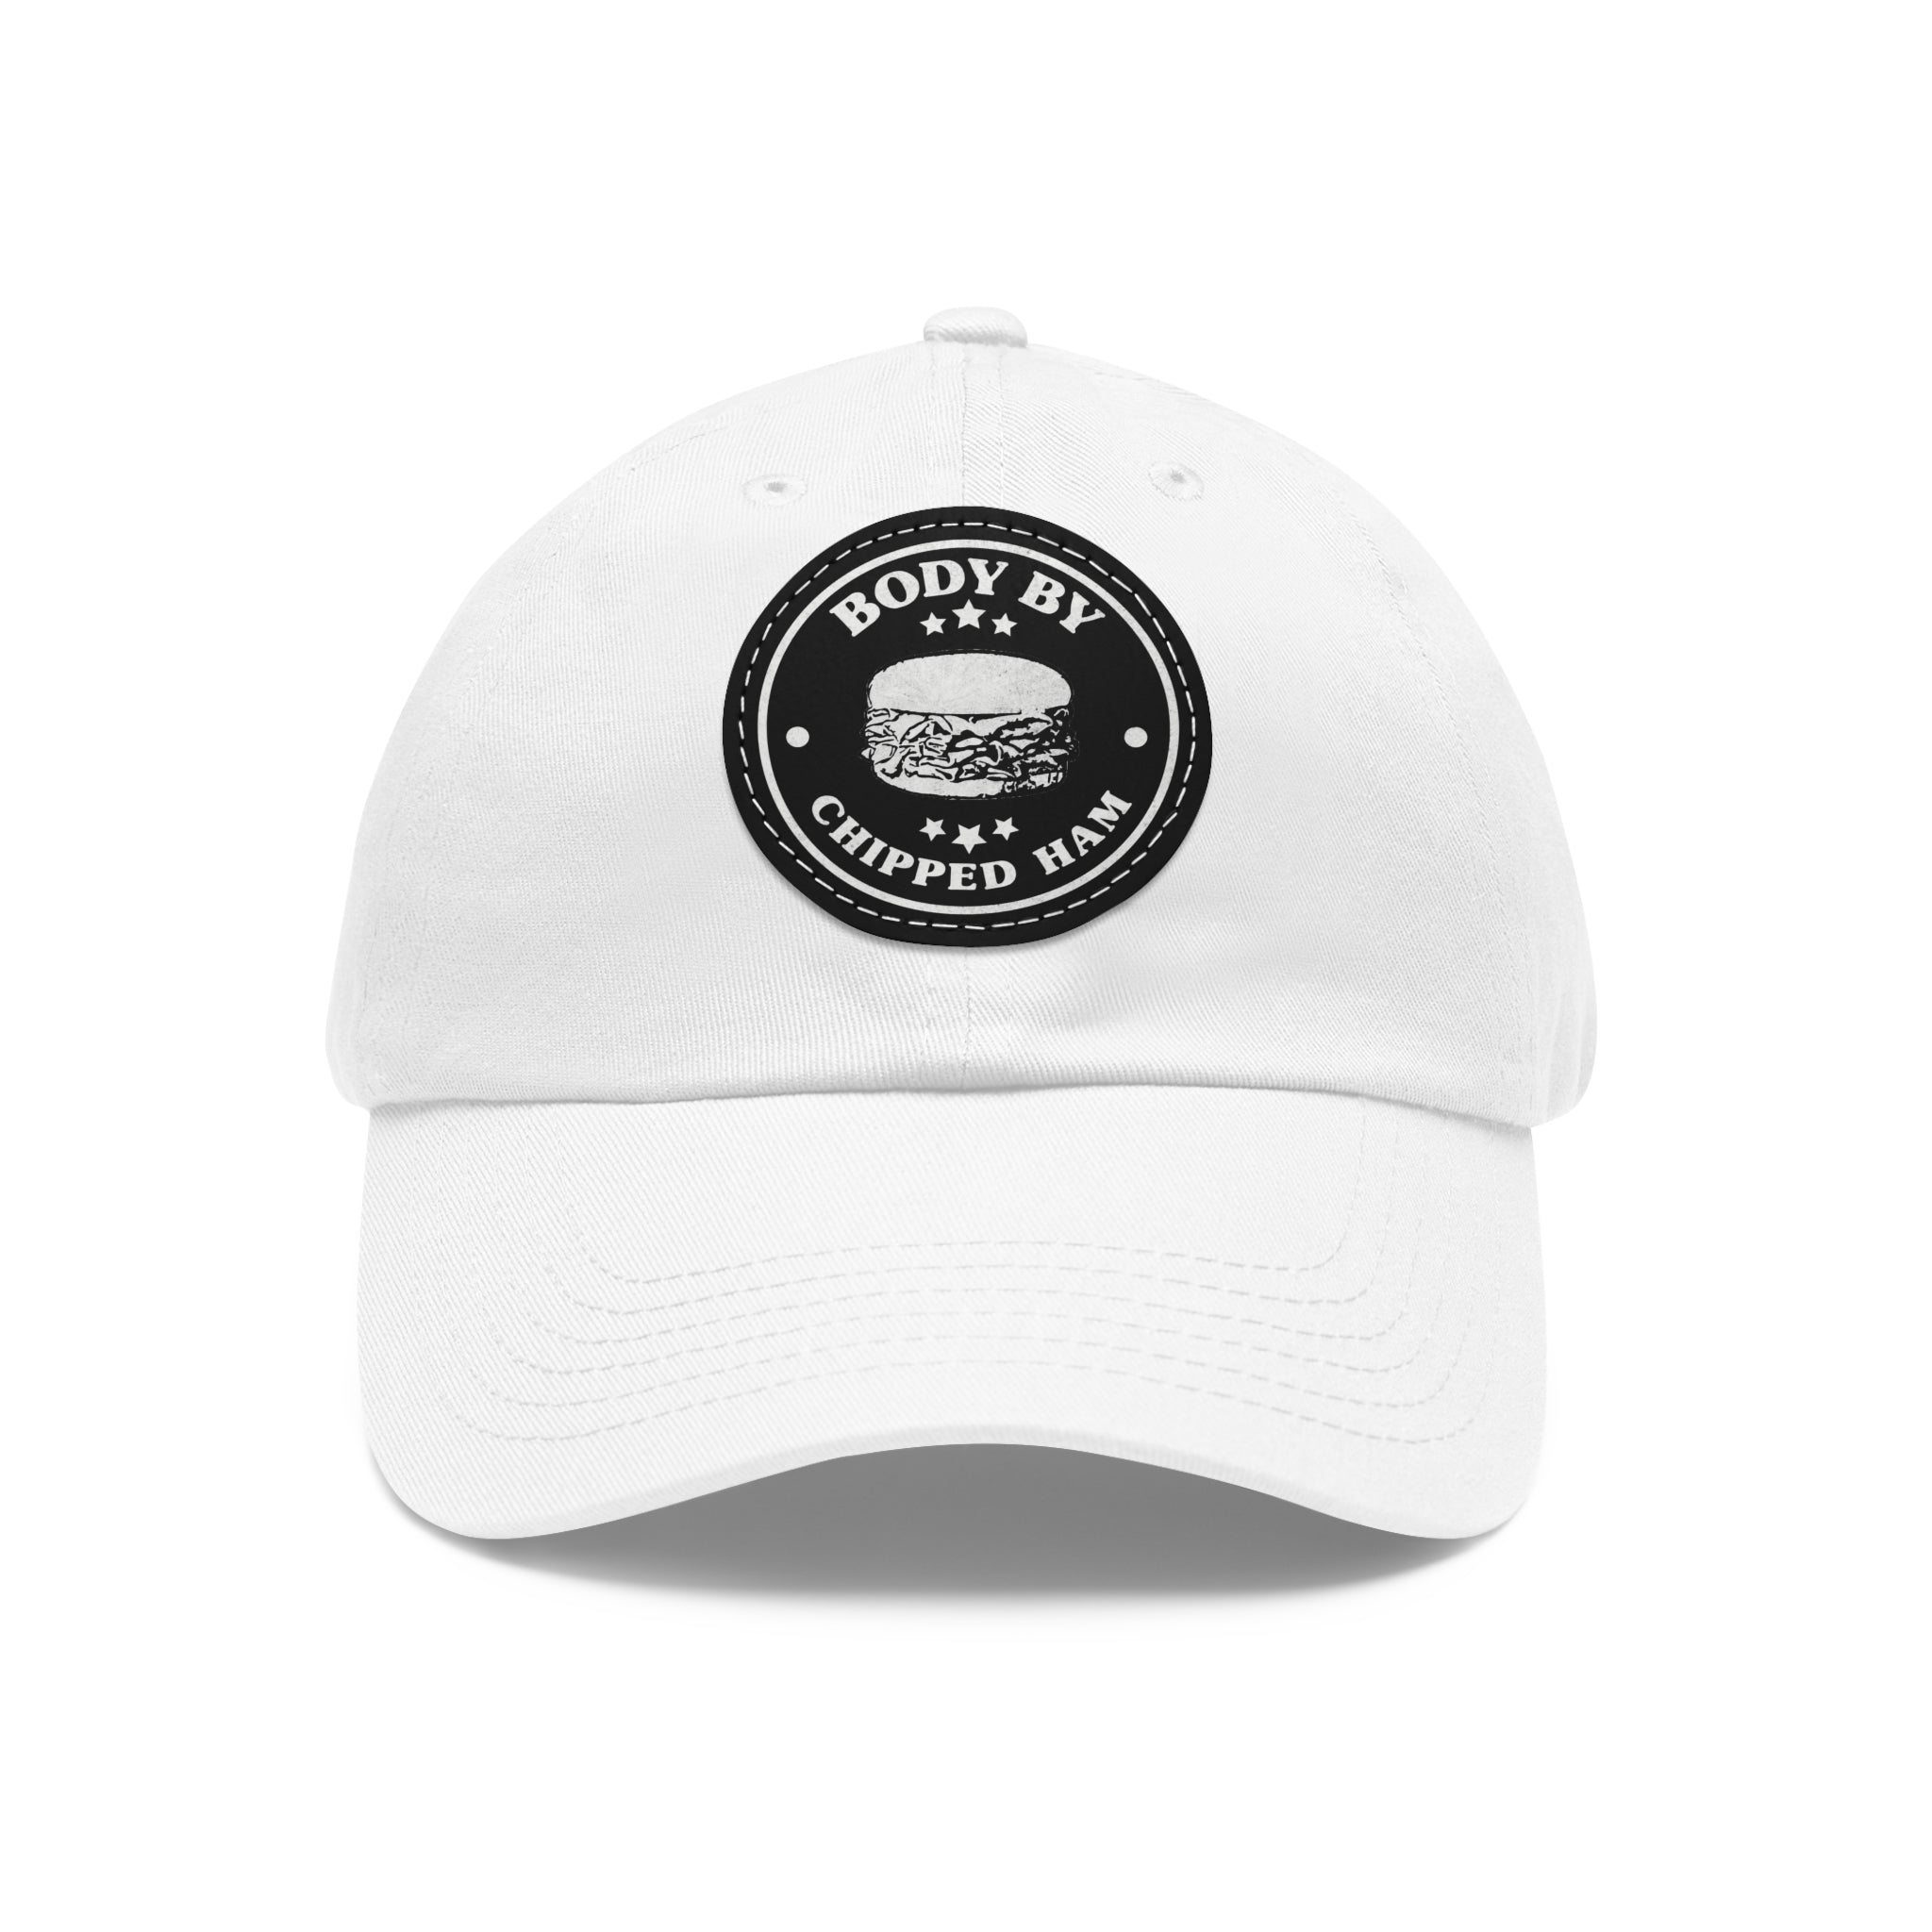 Body by Chipped Ham - Printed Patch Dad Hat - Yinzylvania